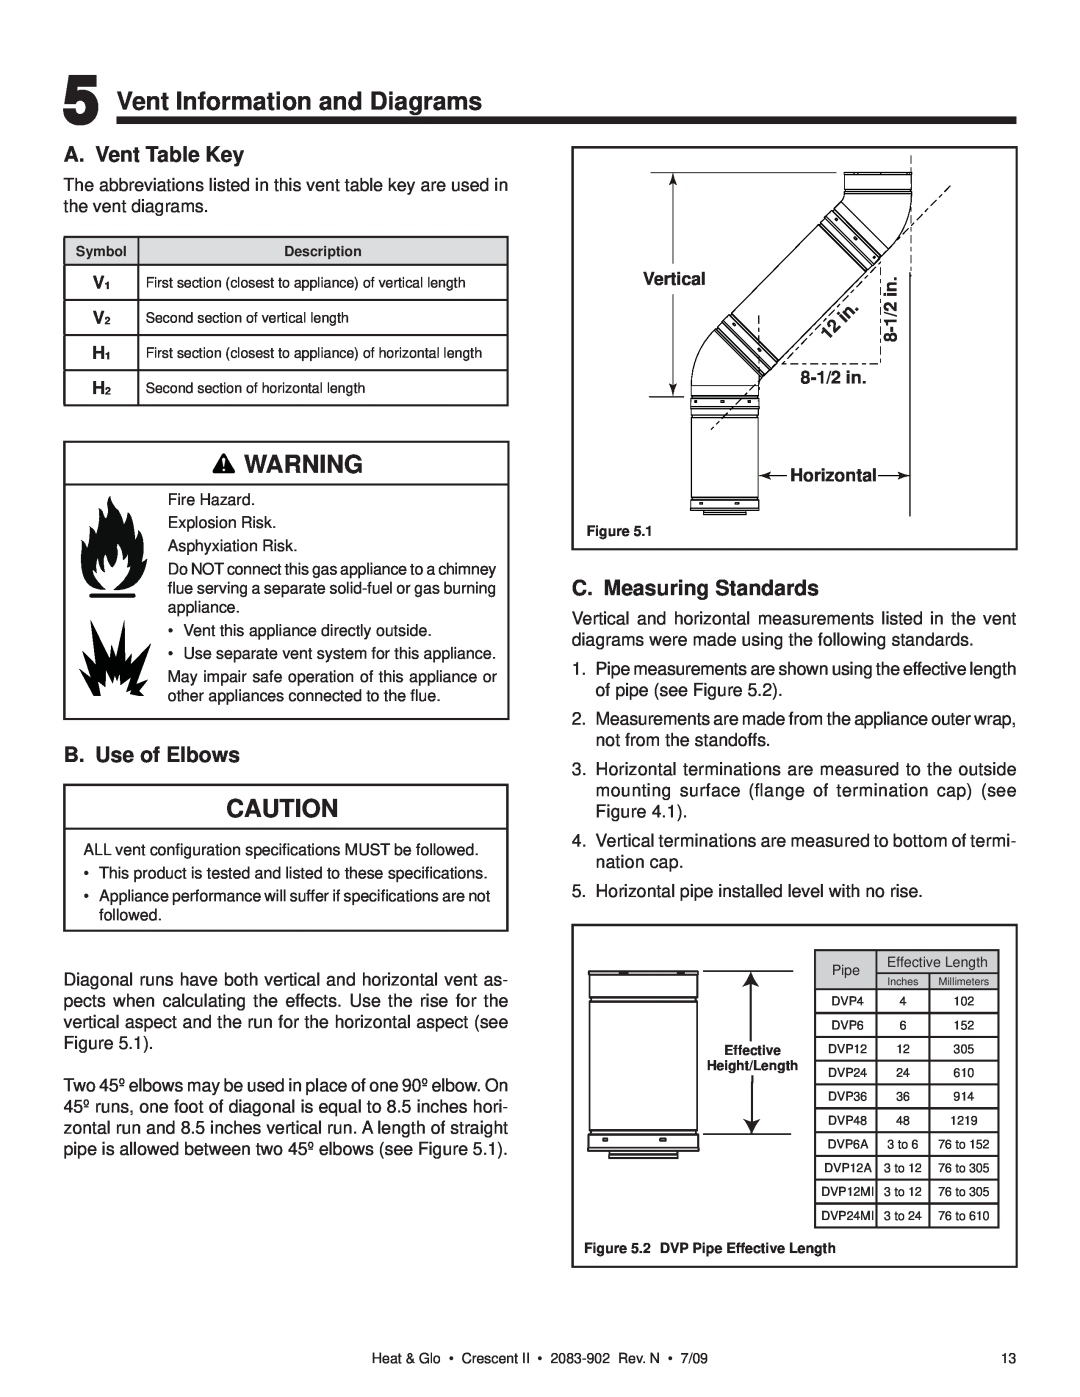 Heat & Glo LifeStyle CRESCENT II owner manual Vent Information and Diagrams, A. Vent Table Key, C. Measuring Standards 